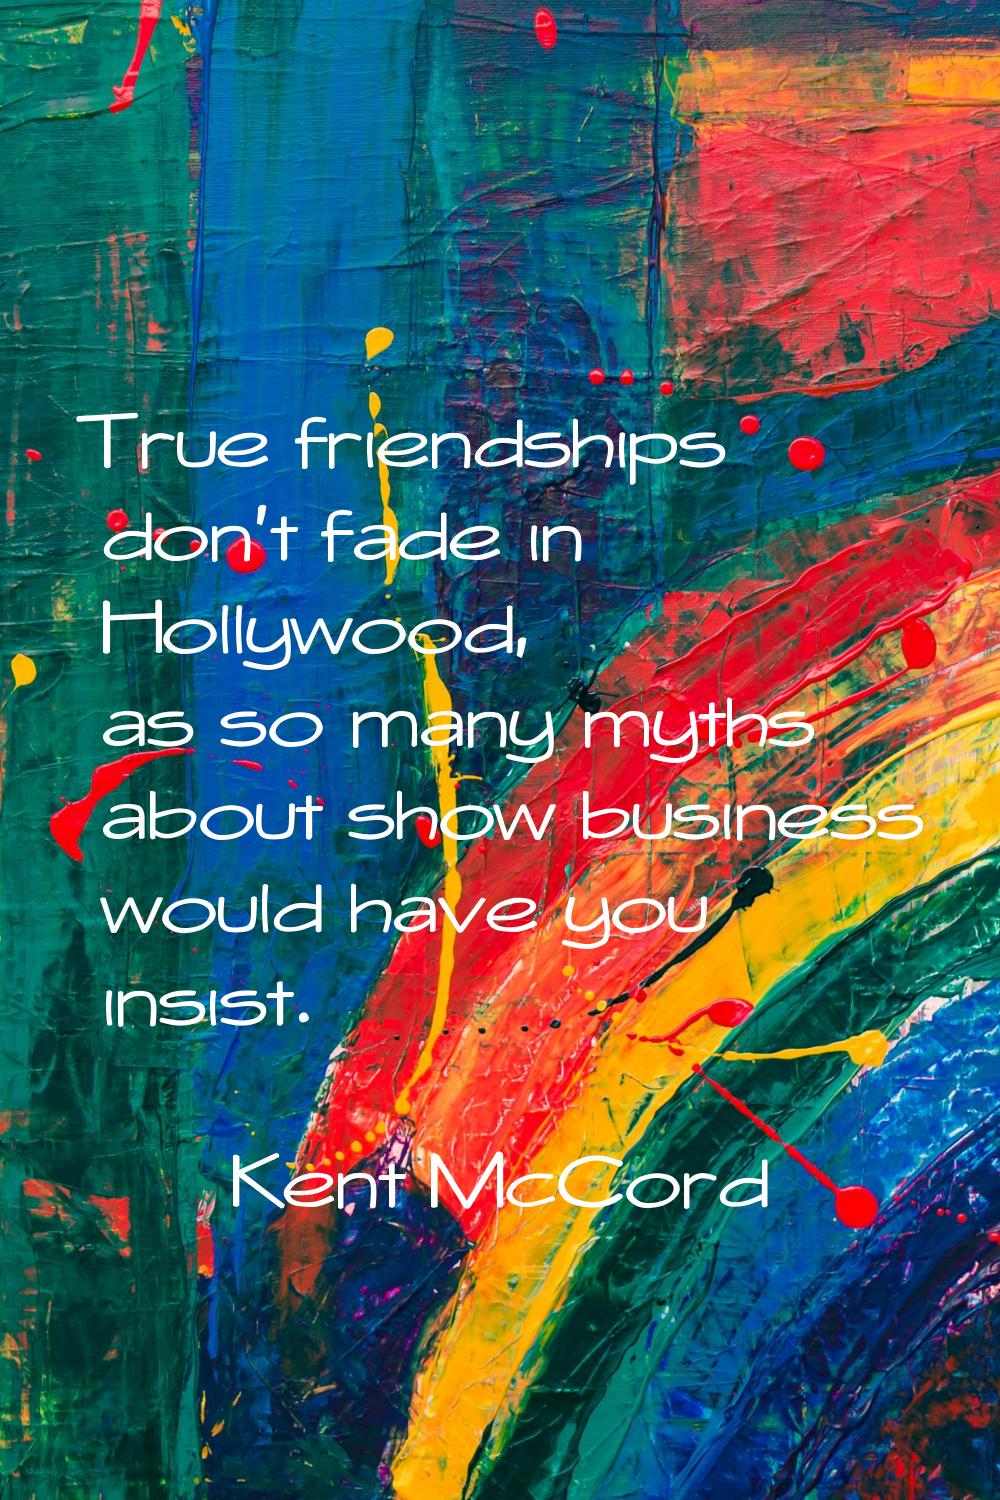 True friendships don't fade in Hollywood, as so many myths about show business would have you insis